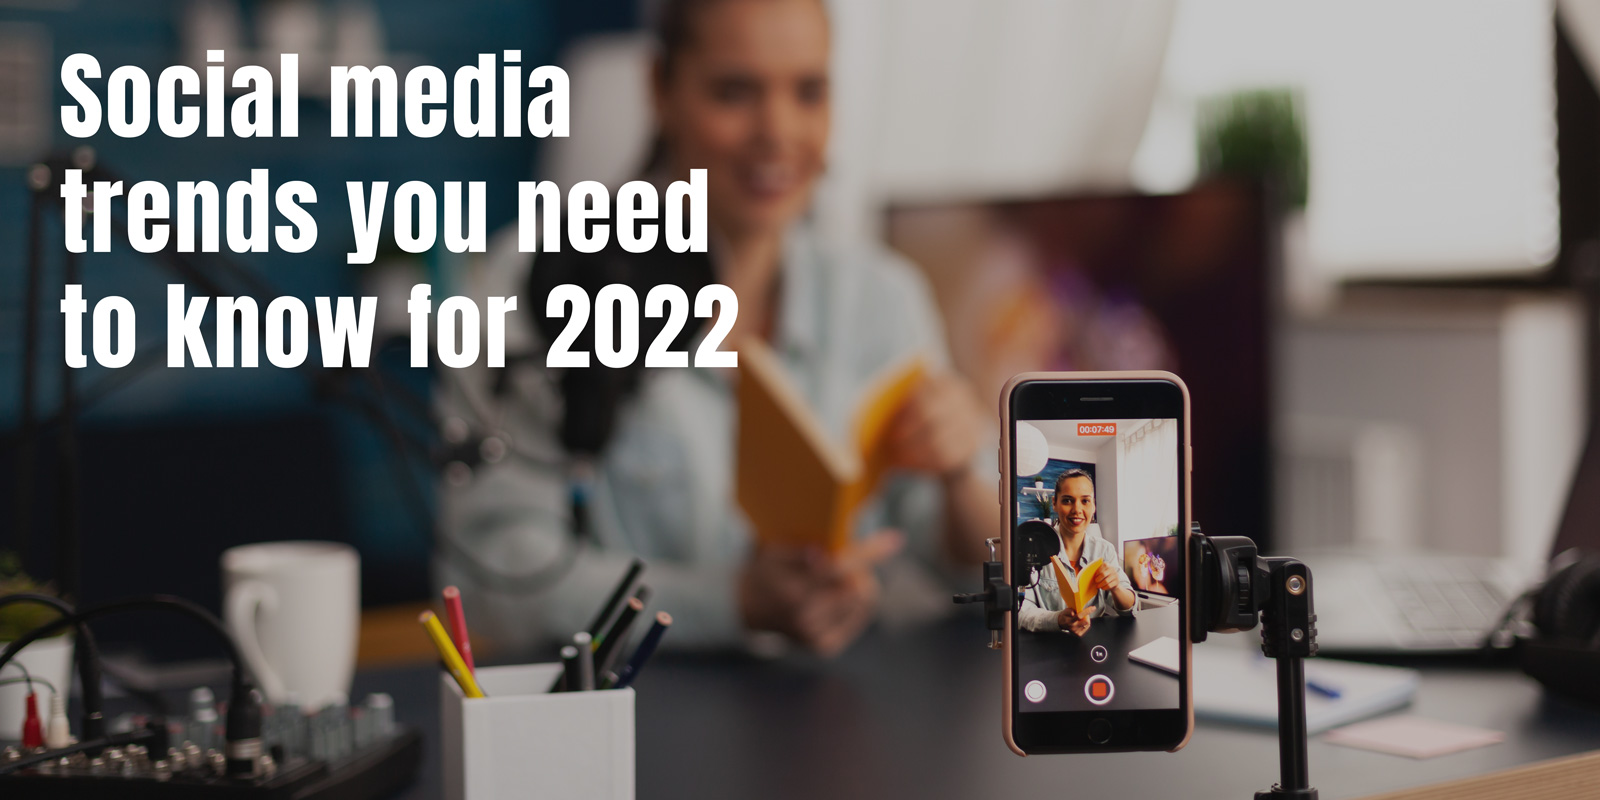 Social media trends you need to know for 2022 Image